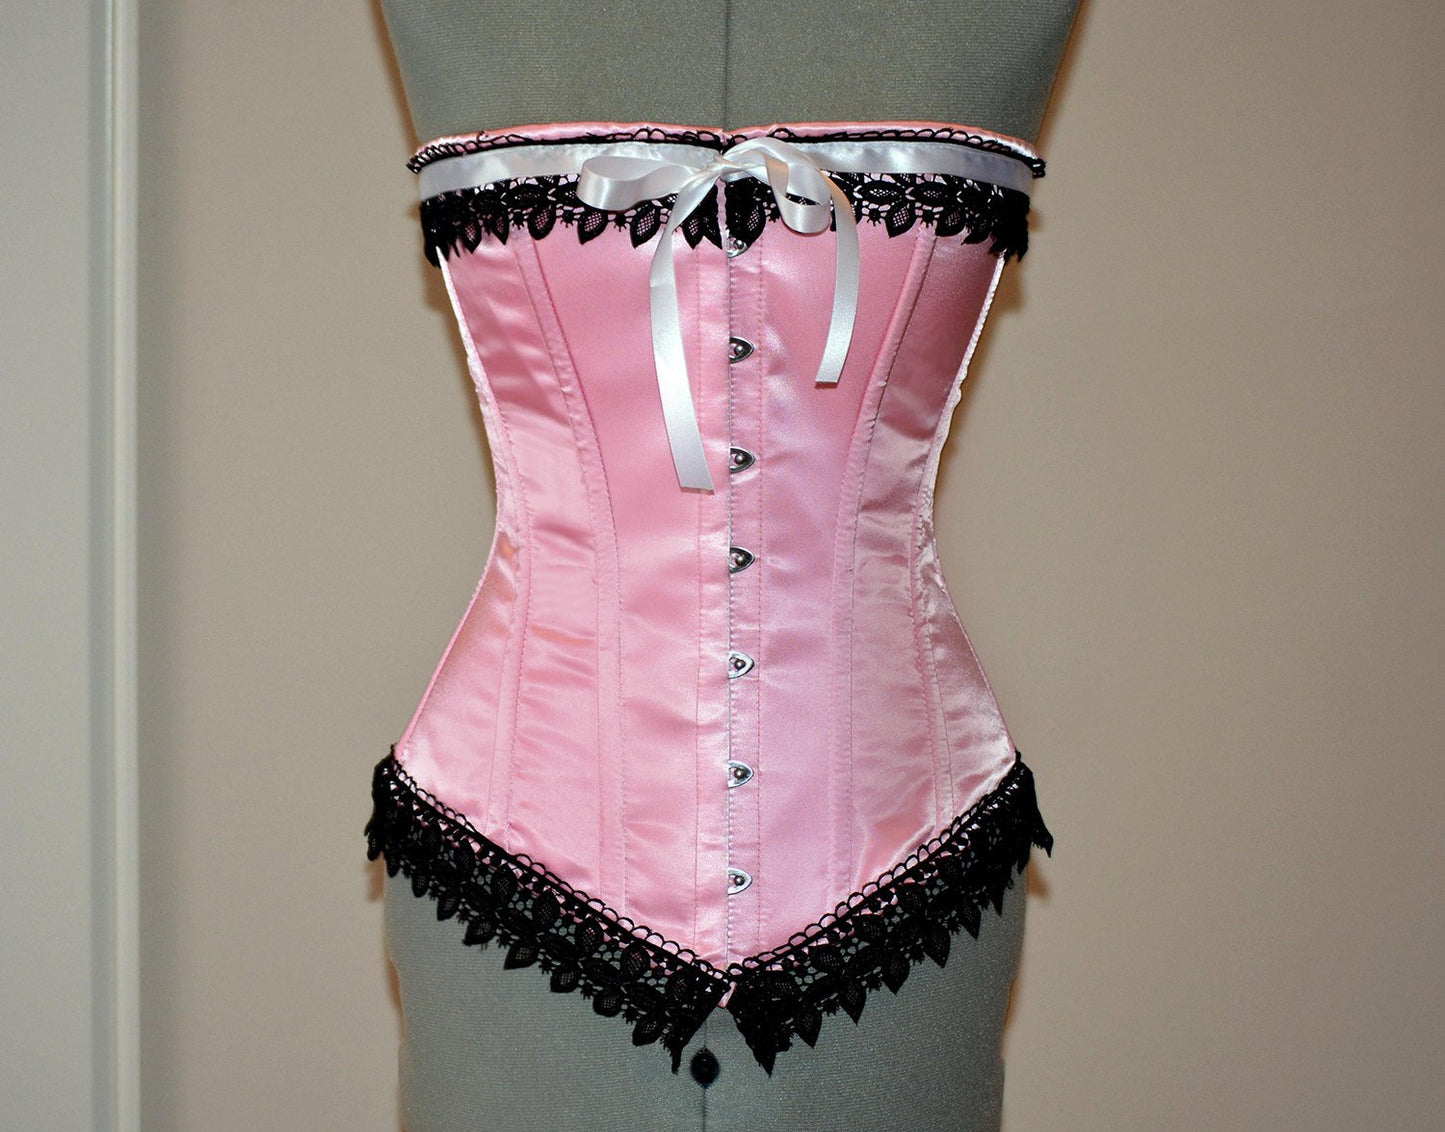 Classic Satin Steel-boned Authentic Waspie Corset for Tight Lacing and Waist  Training. Gothic, Vintage. Regular Sizes Sale Listing 